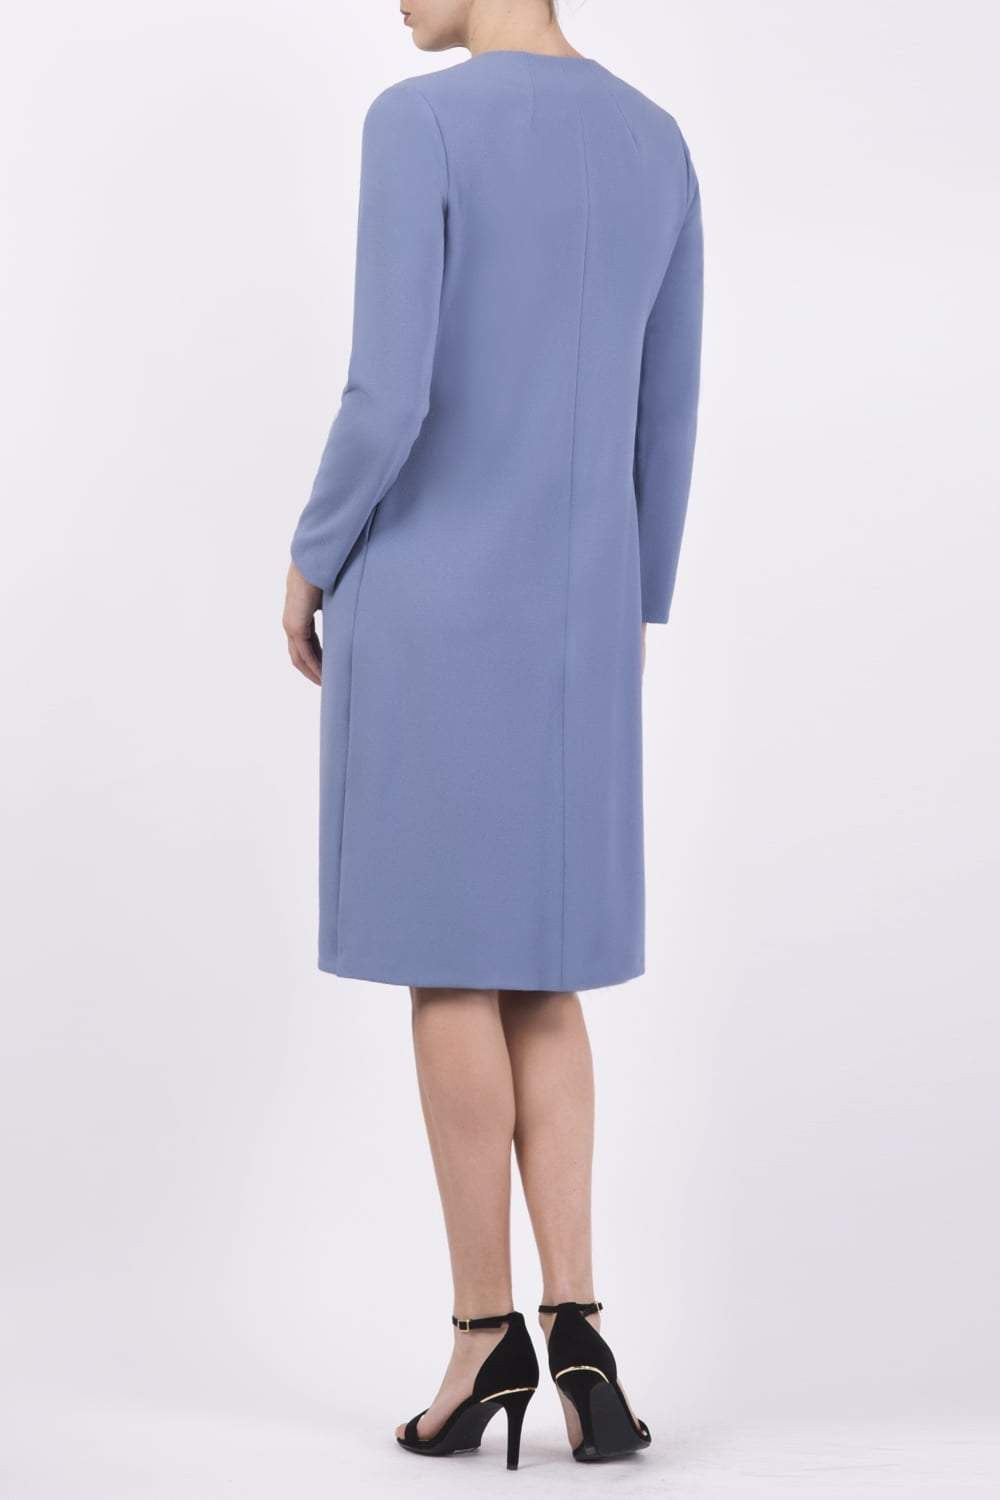 Model wearing the Diva Bliss Coat with round neckline in Stone Blue back image